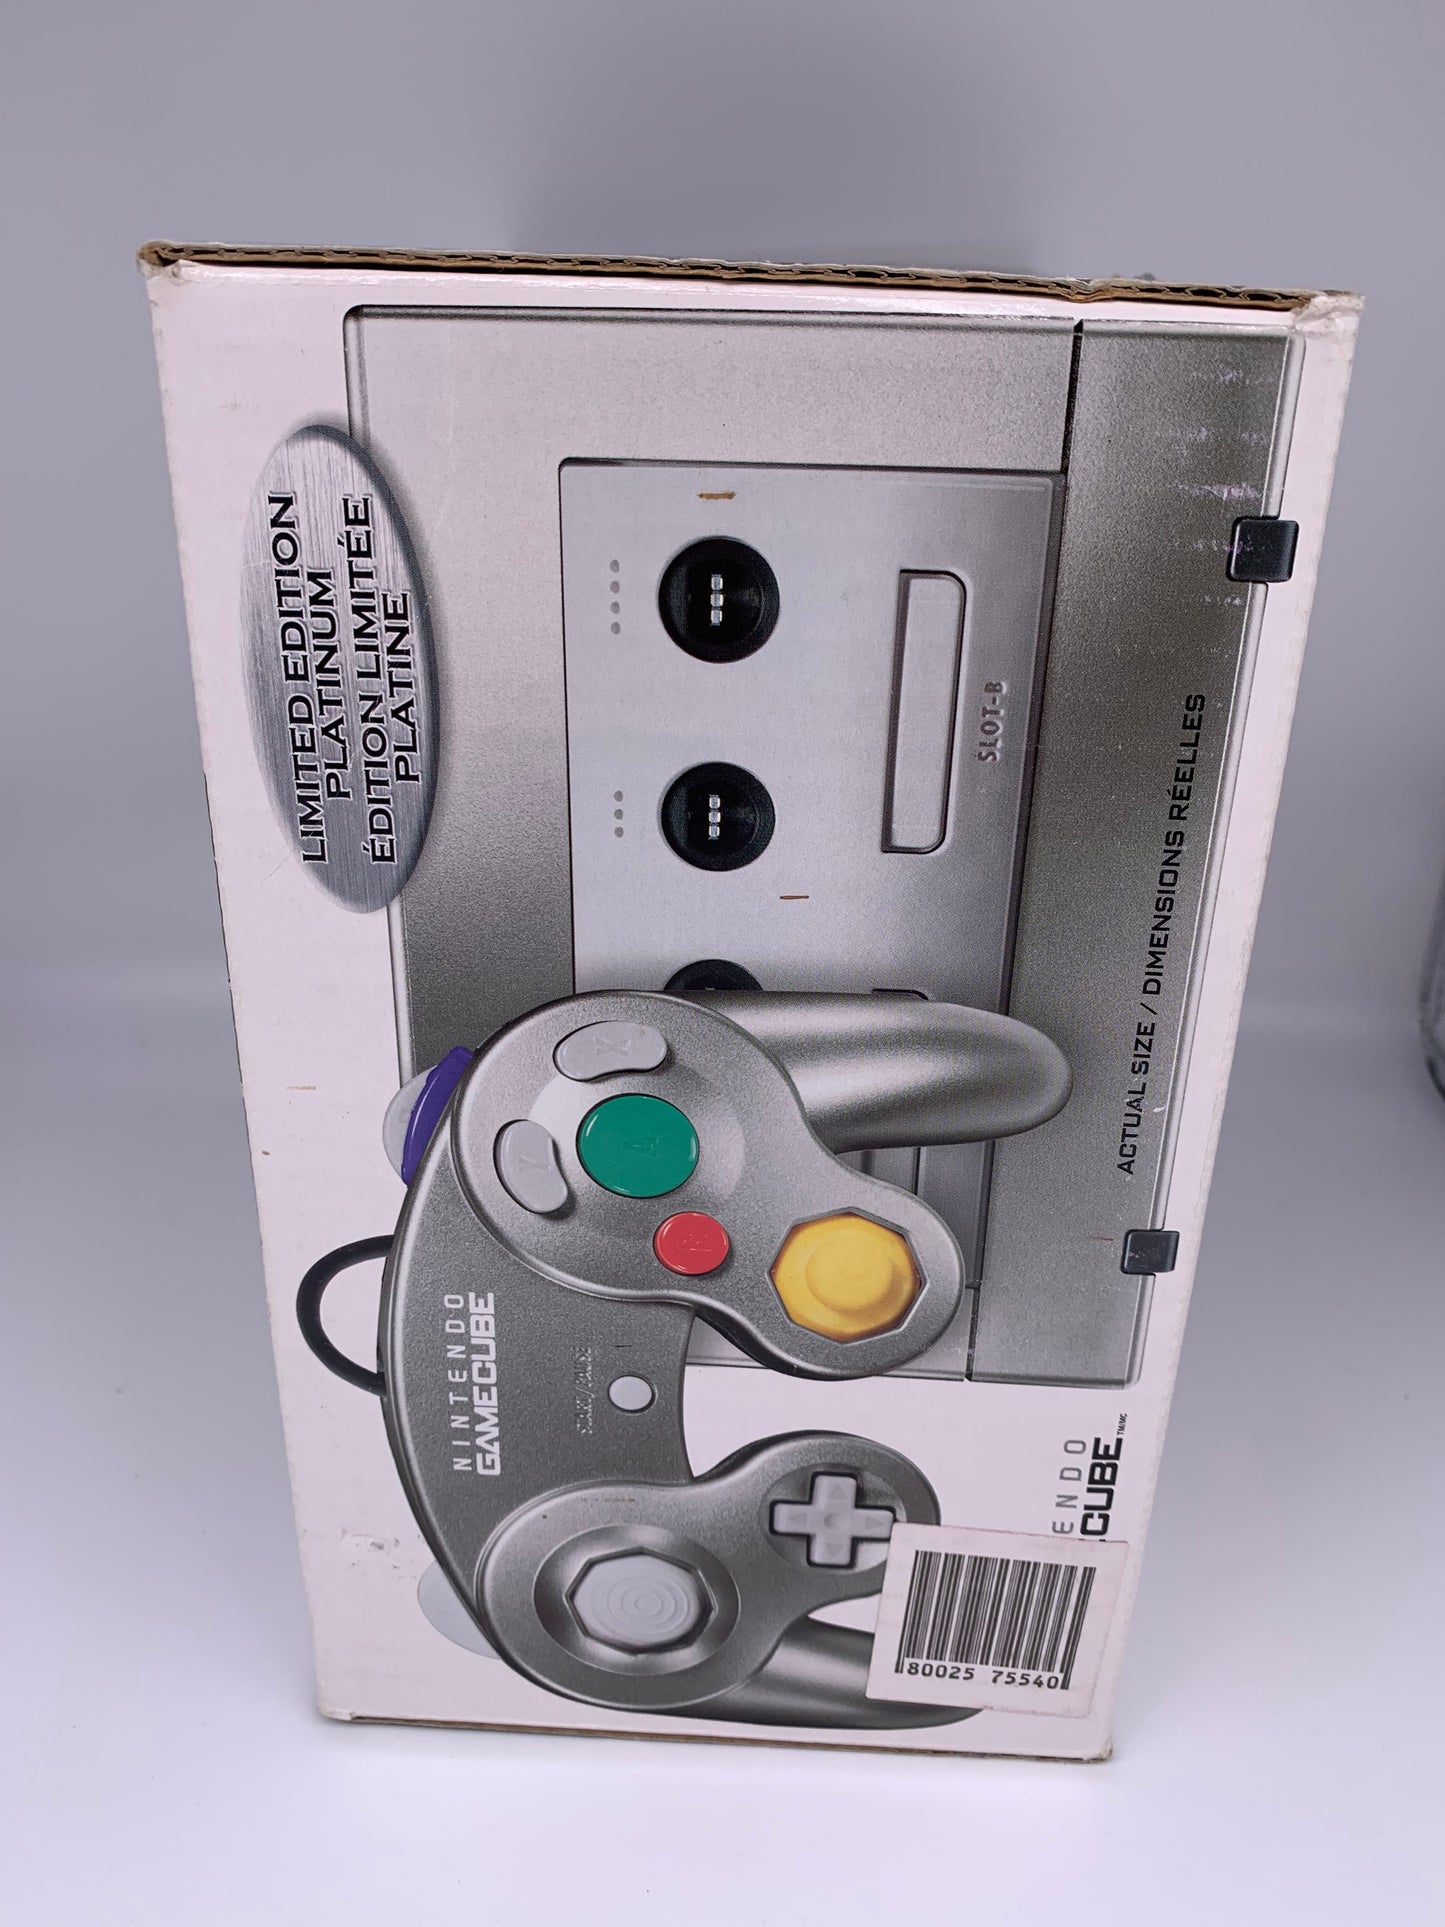 NiNTENDO GAMECUBE [NGC] CONSOLE | MODEL ARGENT SiLVER DOL-001 USA | LiMiTED EDiTiON PLATiNUM